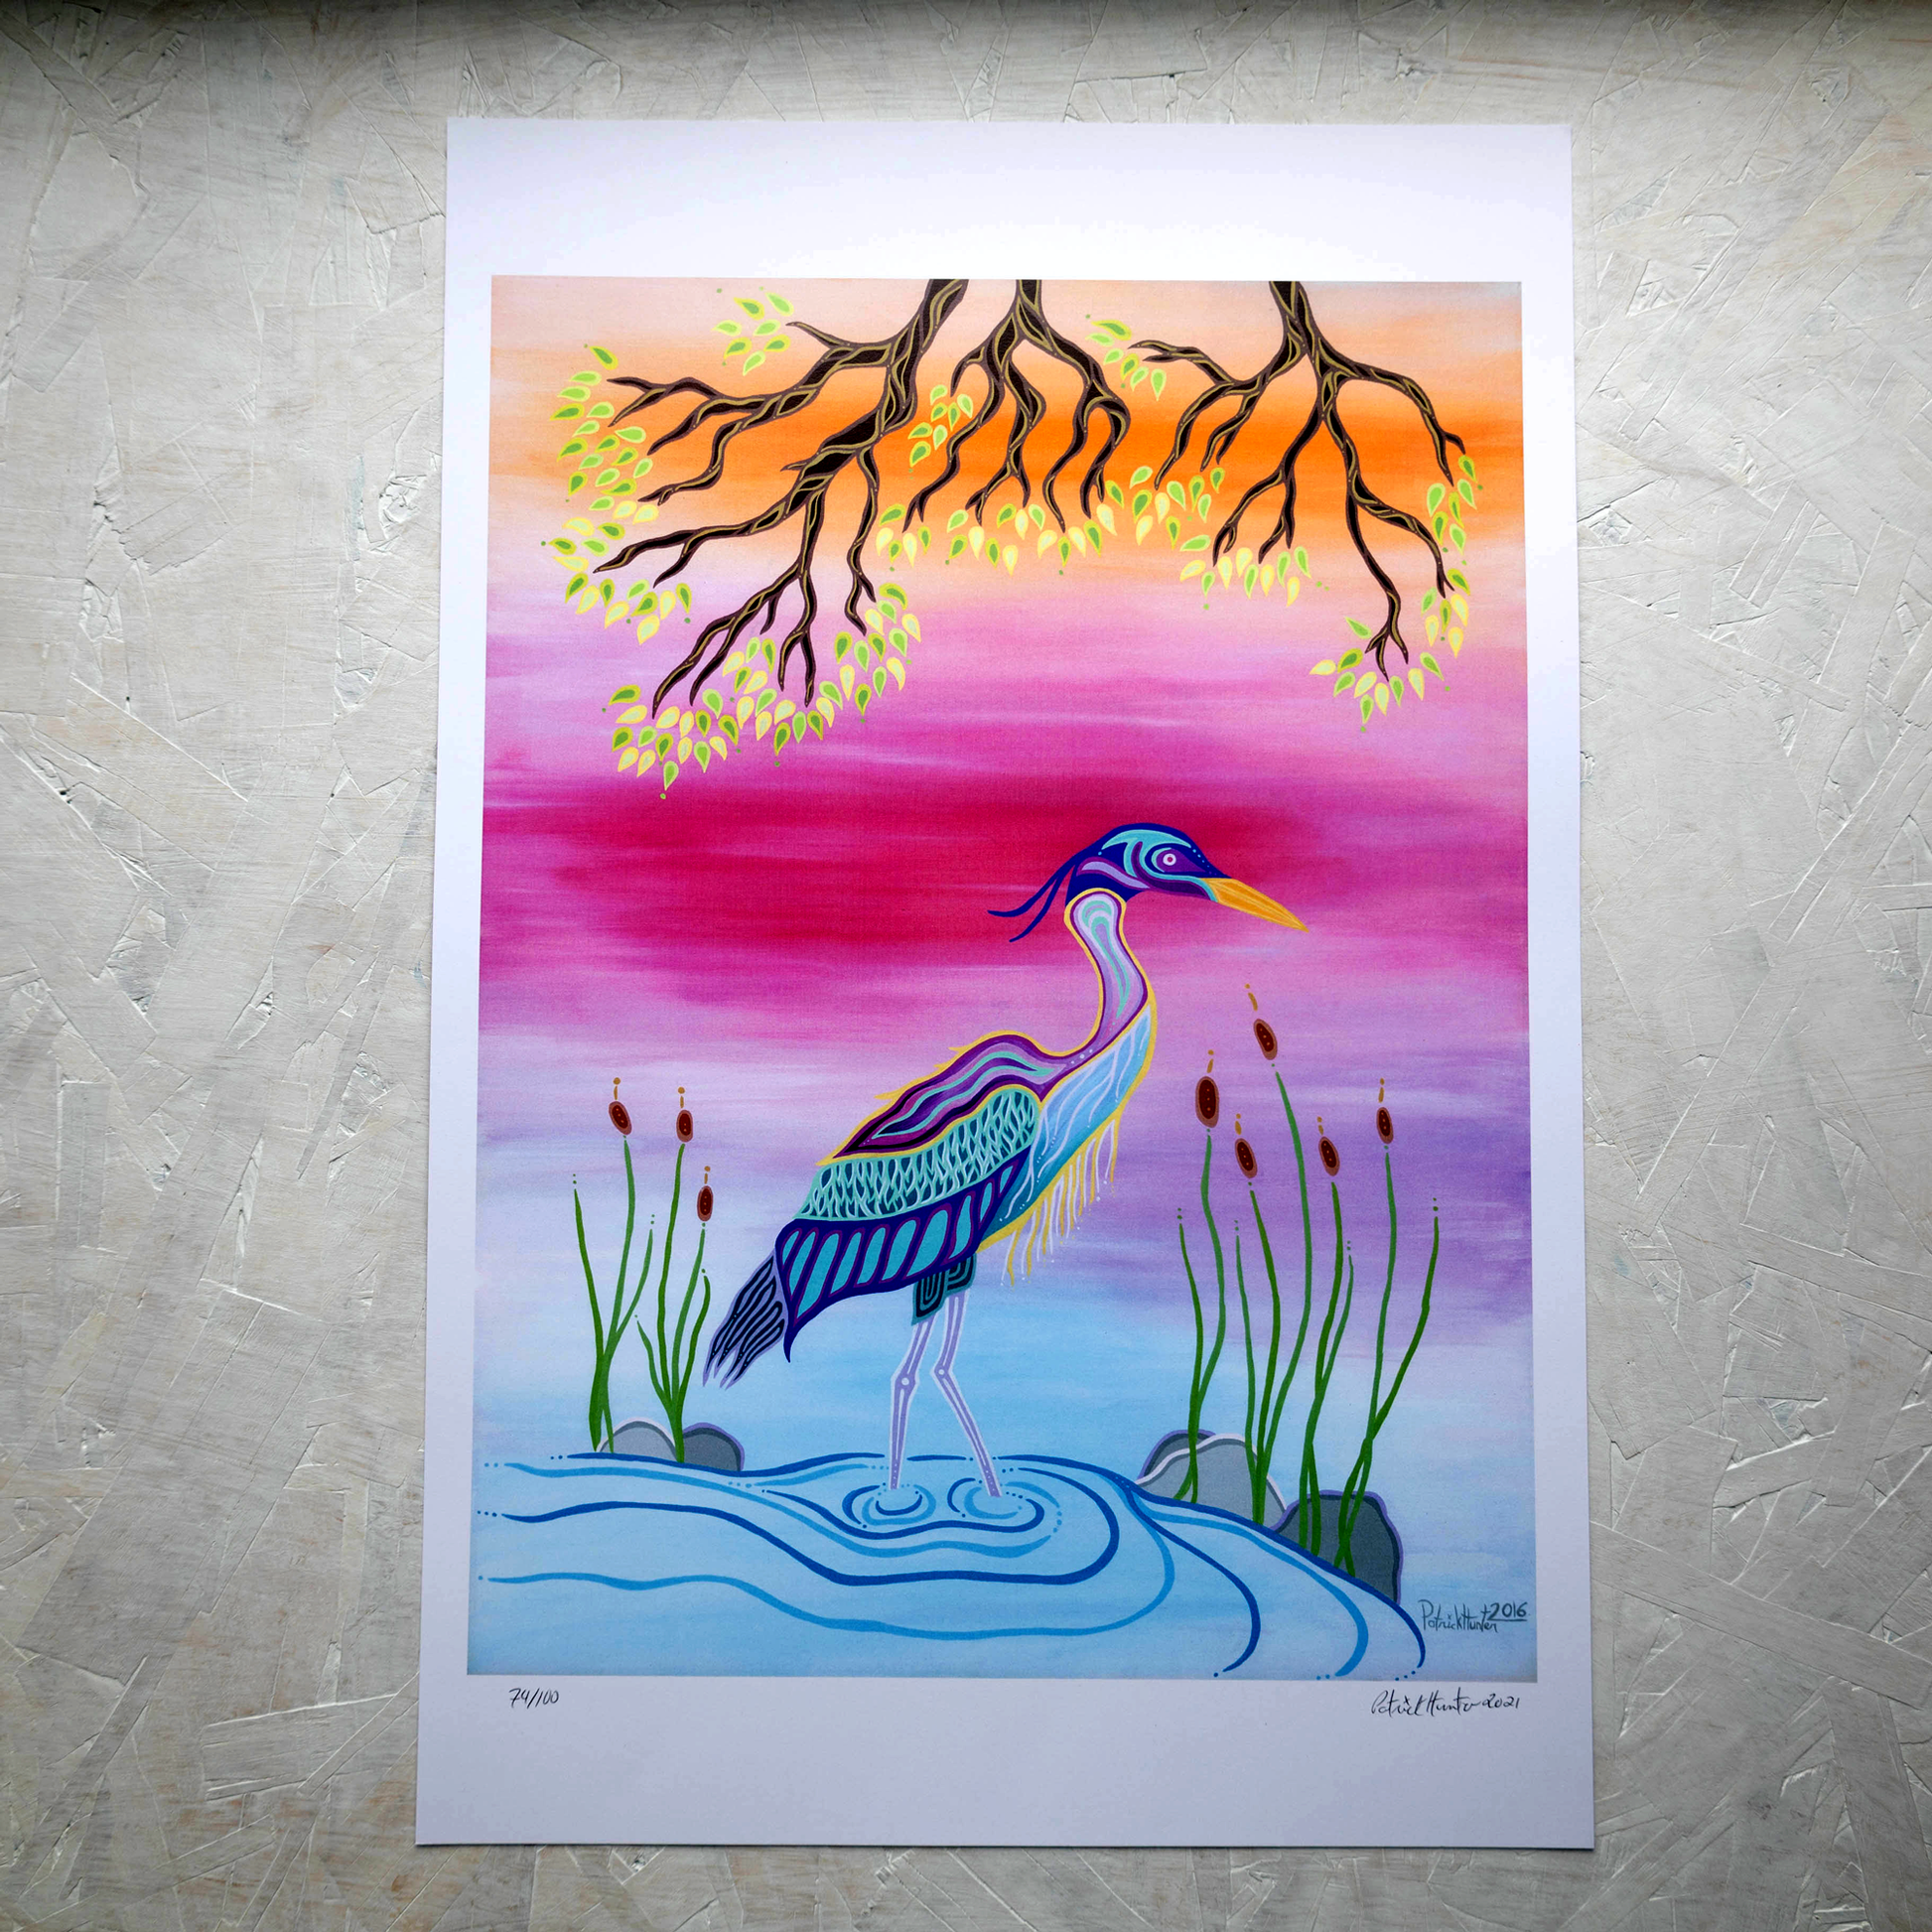 Print of Patrick Hunter's painting of a blue heron in woodland art style.